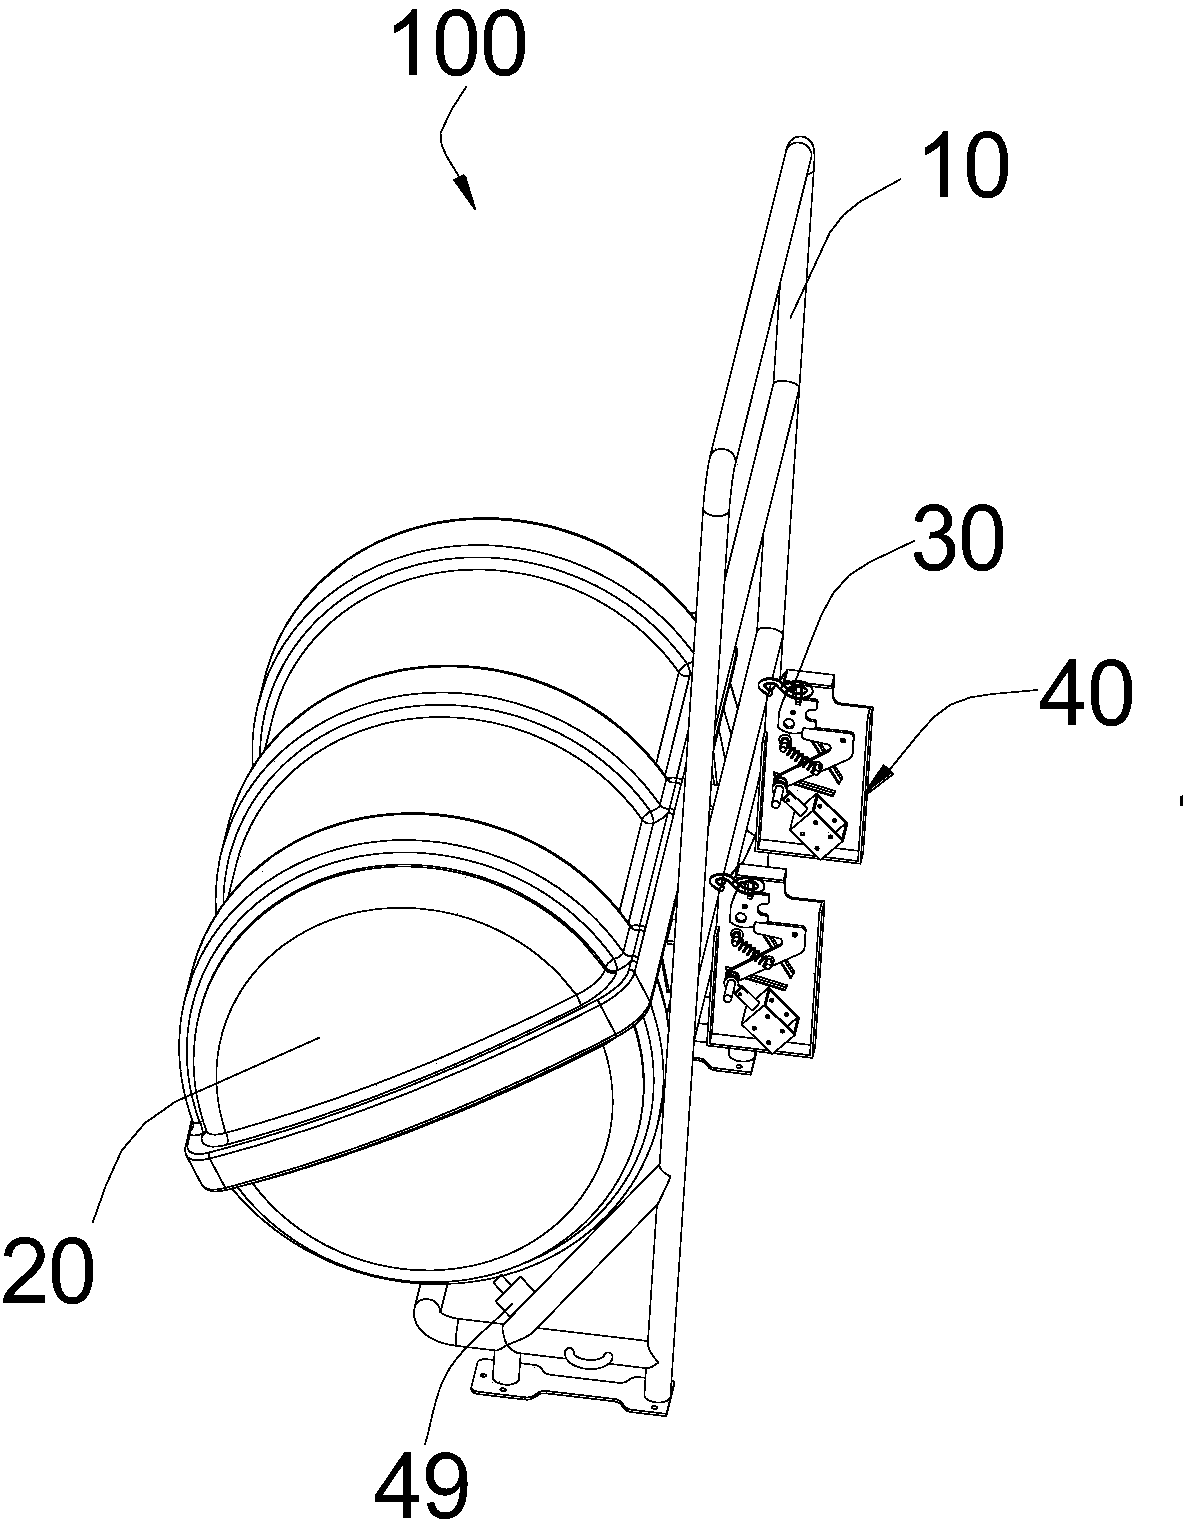 Release device and lifesaving equipment